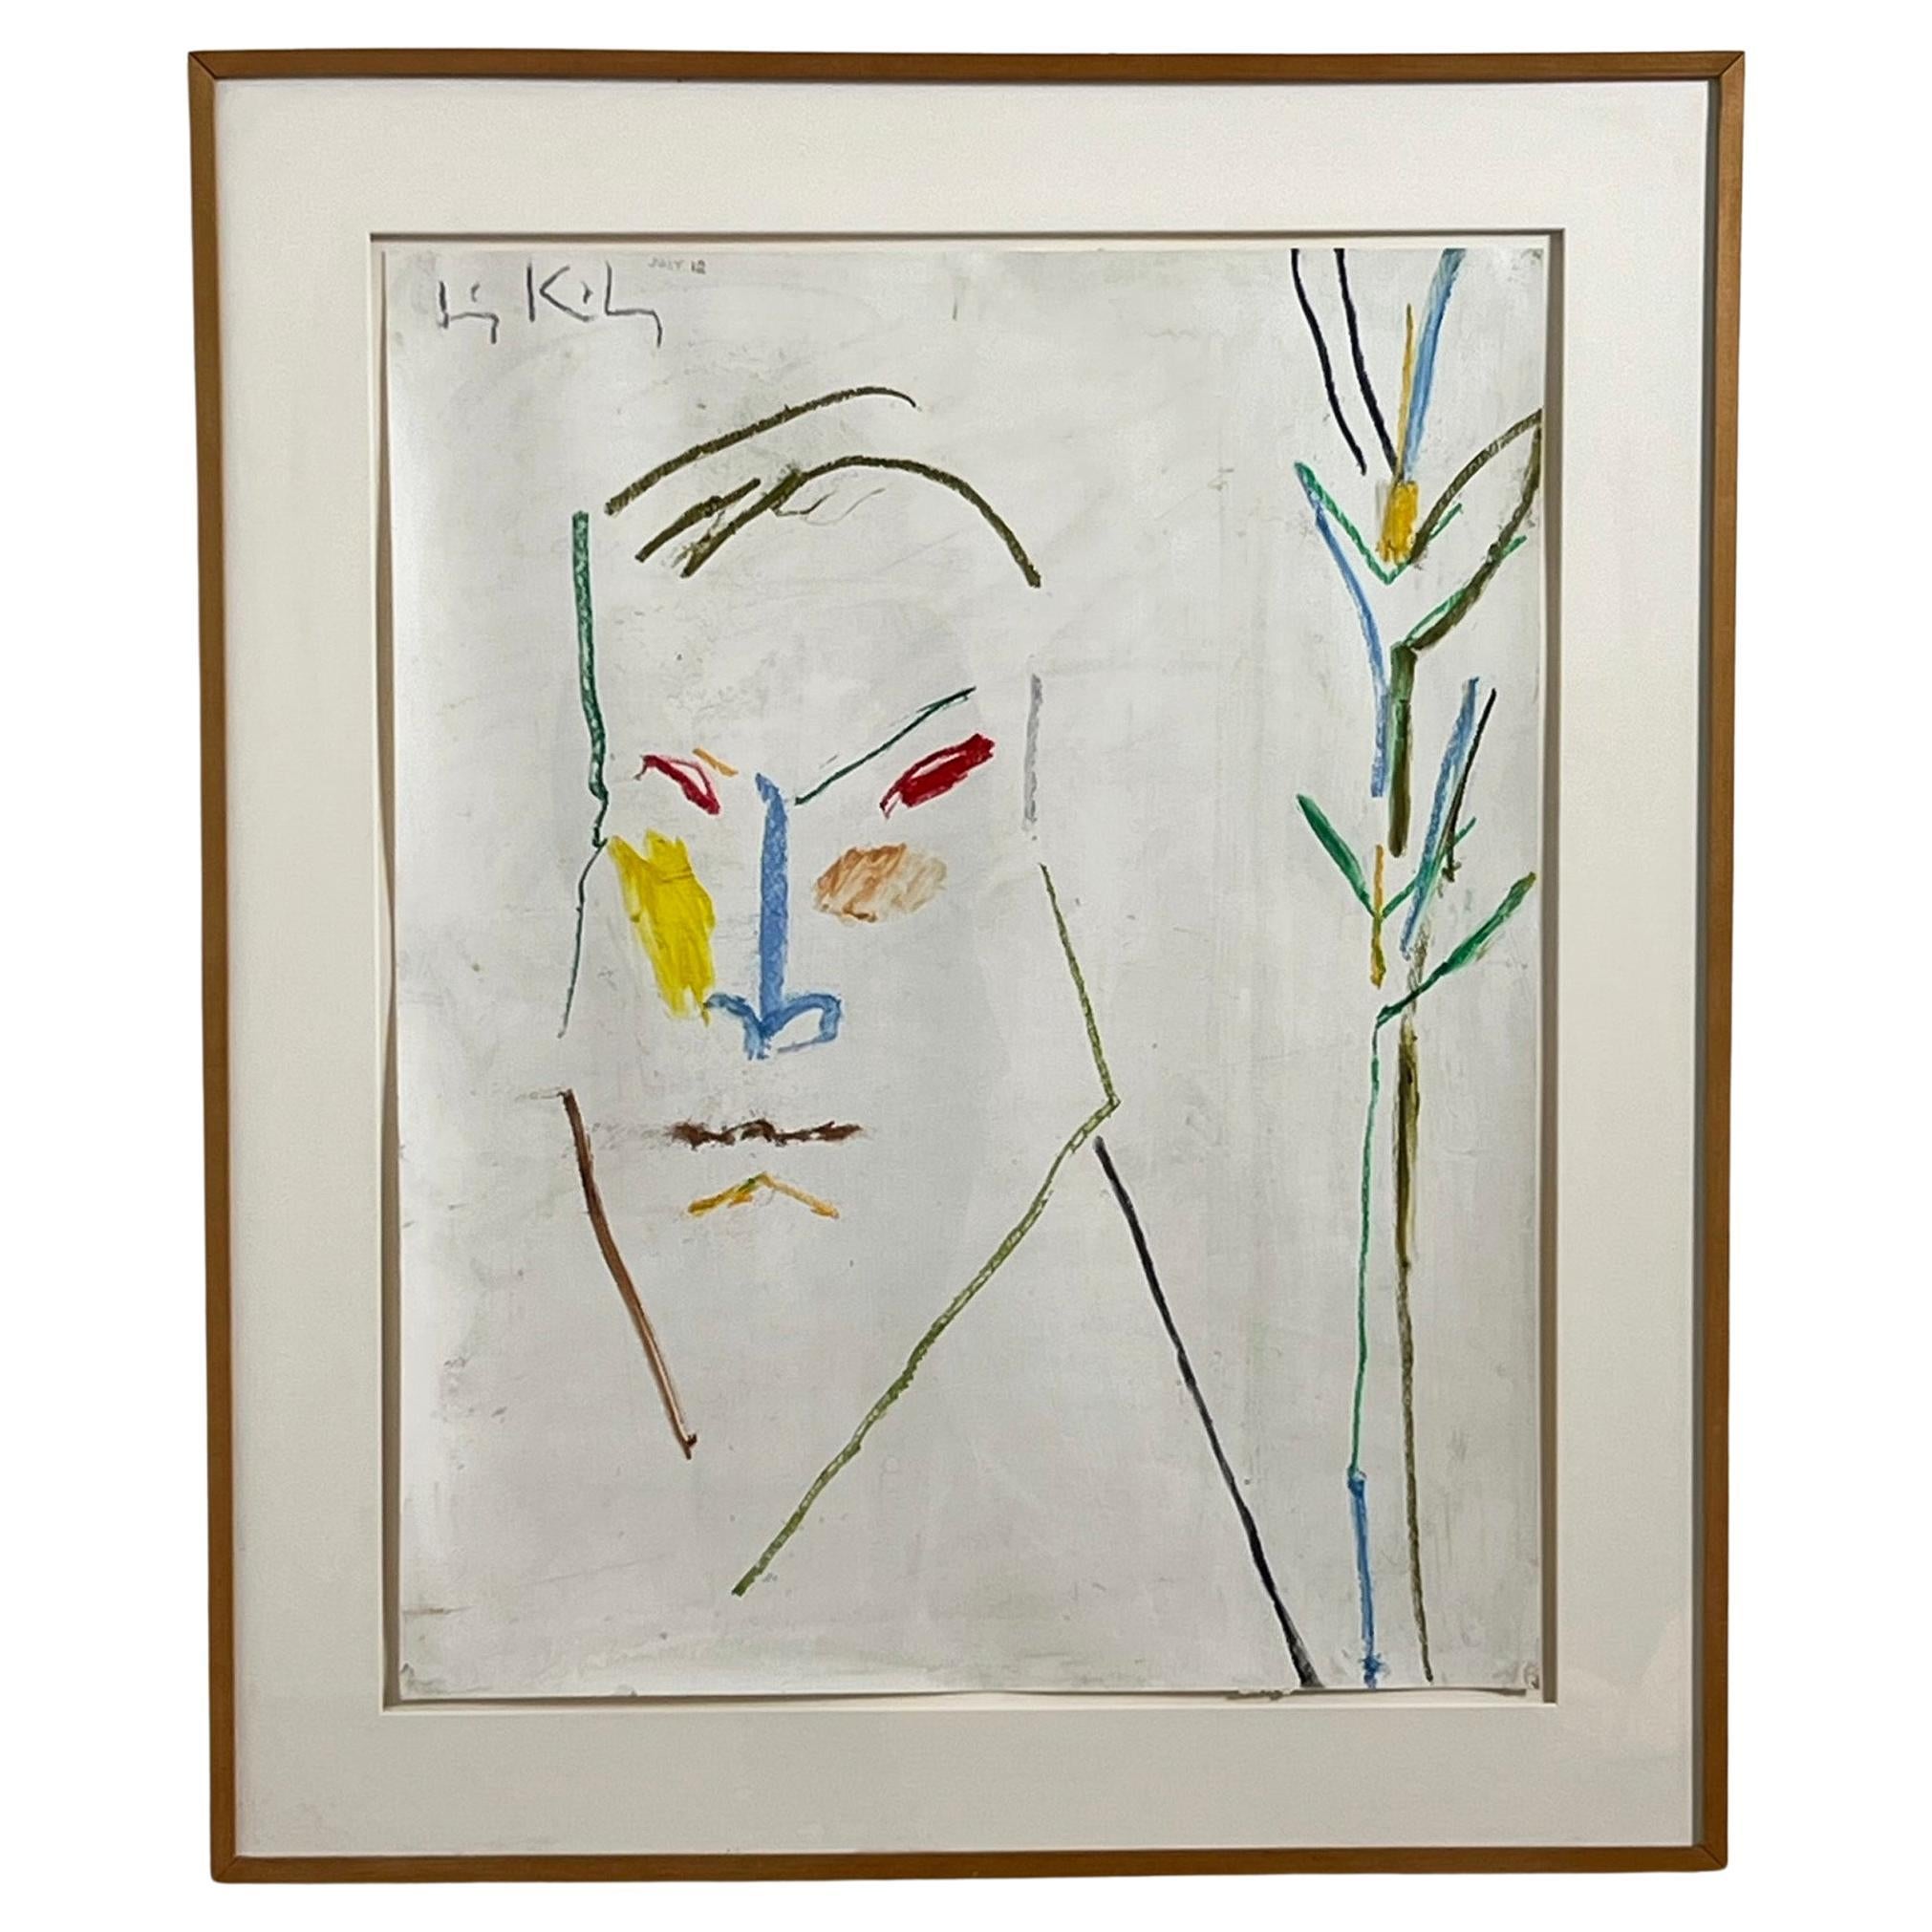 Irving Kriesberg Figurative Expressionist Oil Crayon on Paper Dated 2012 For Sale